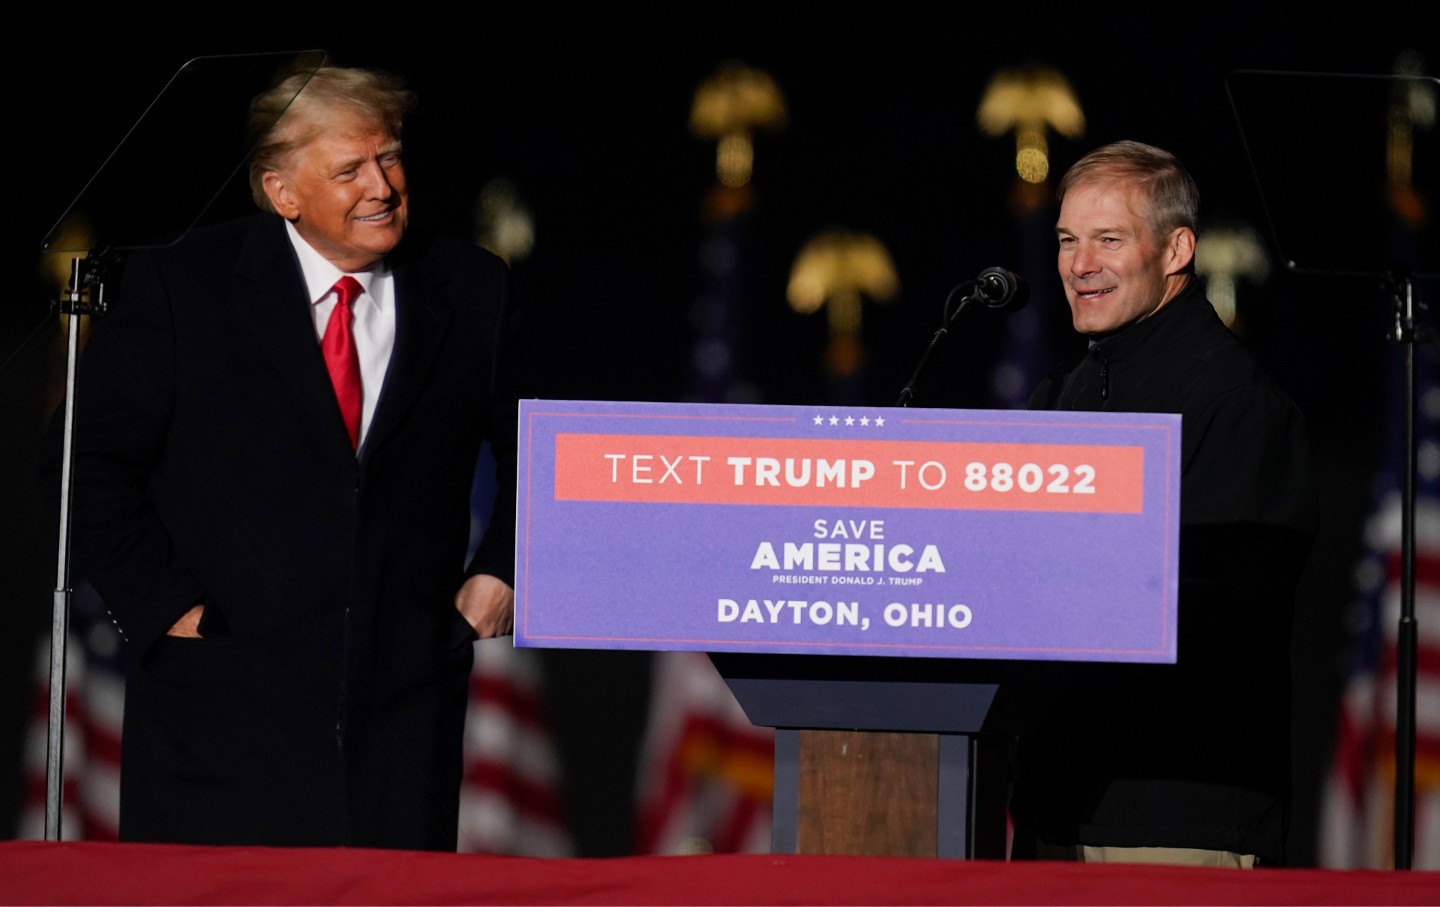 Former president Donald Trump welcomes Representative Jim Jordan (R-Ohio) to the stage at a campaign rally in support of the campaign of Ohio Senate candidate J.D. Vance at Wright Bros. Aero Inc. at Dayton International Airport on Monday, November 7, 2022, in Vandalia, Ohio. (AP Photo/Michael Conroy)